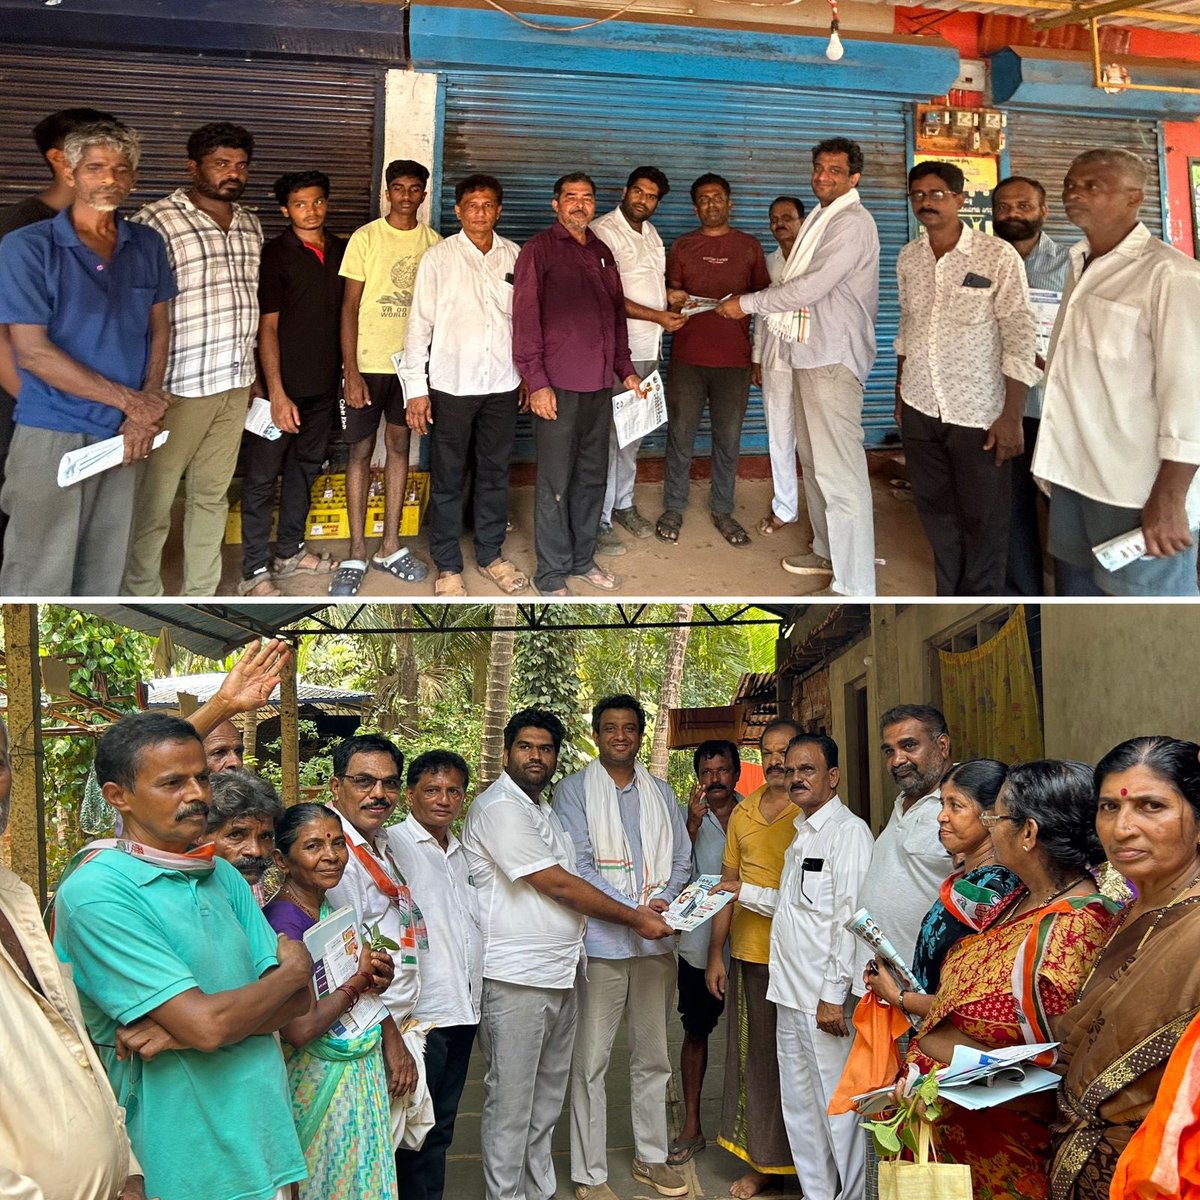 Some moments from door to door campaigning along with Block Congress Teams along with our senior leaders in Bargi, Hegde, Holangadde, Baada, Aghnashini and Kagal. It was great to see the spirit of our party cadre and spend time with them campaigning. @INCKarnataka @INCIndia